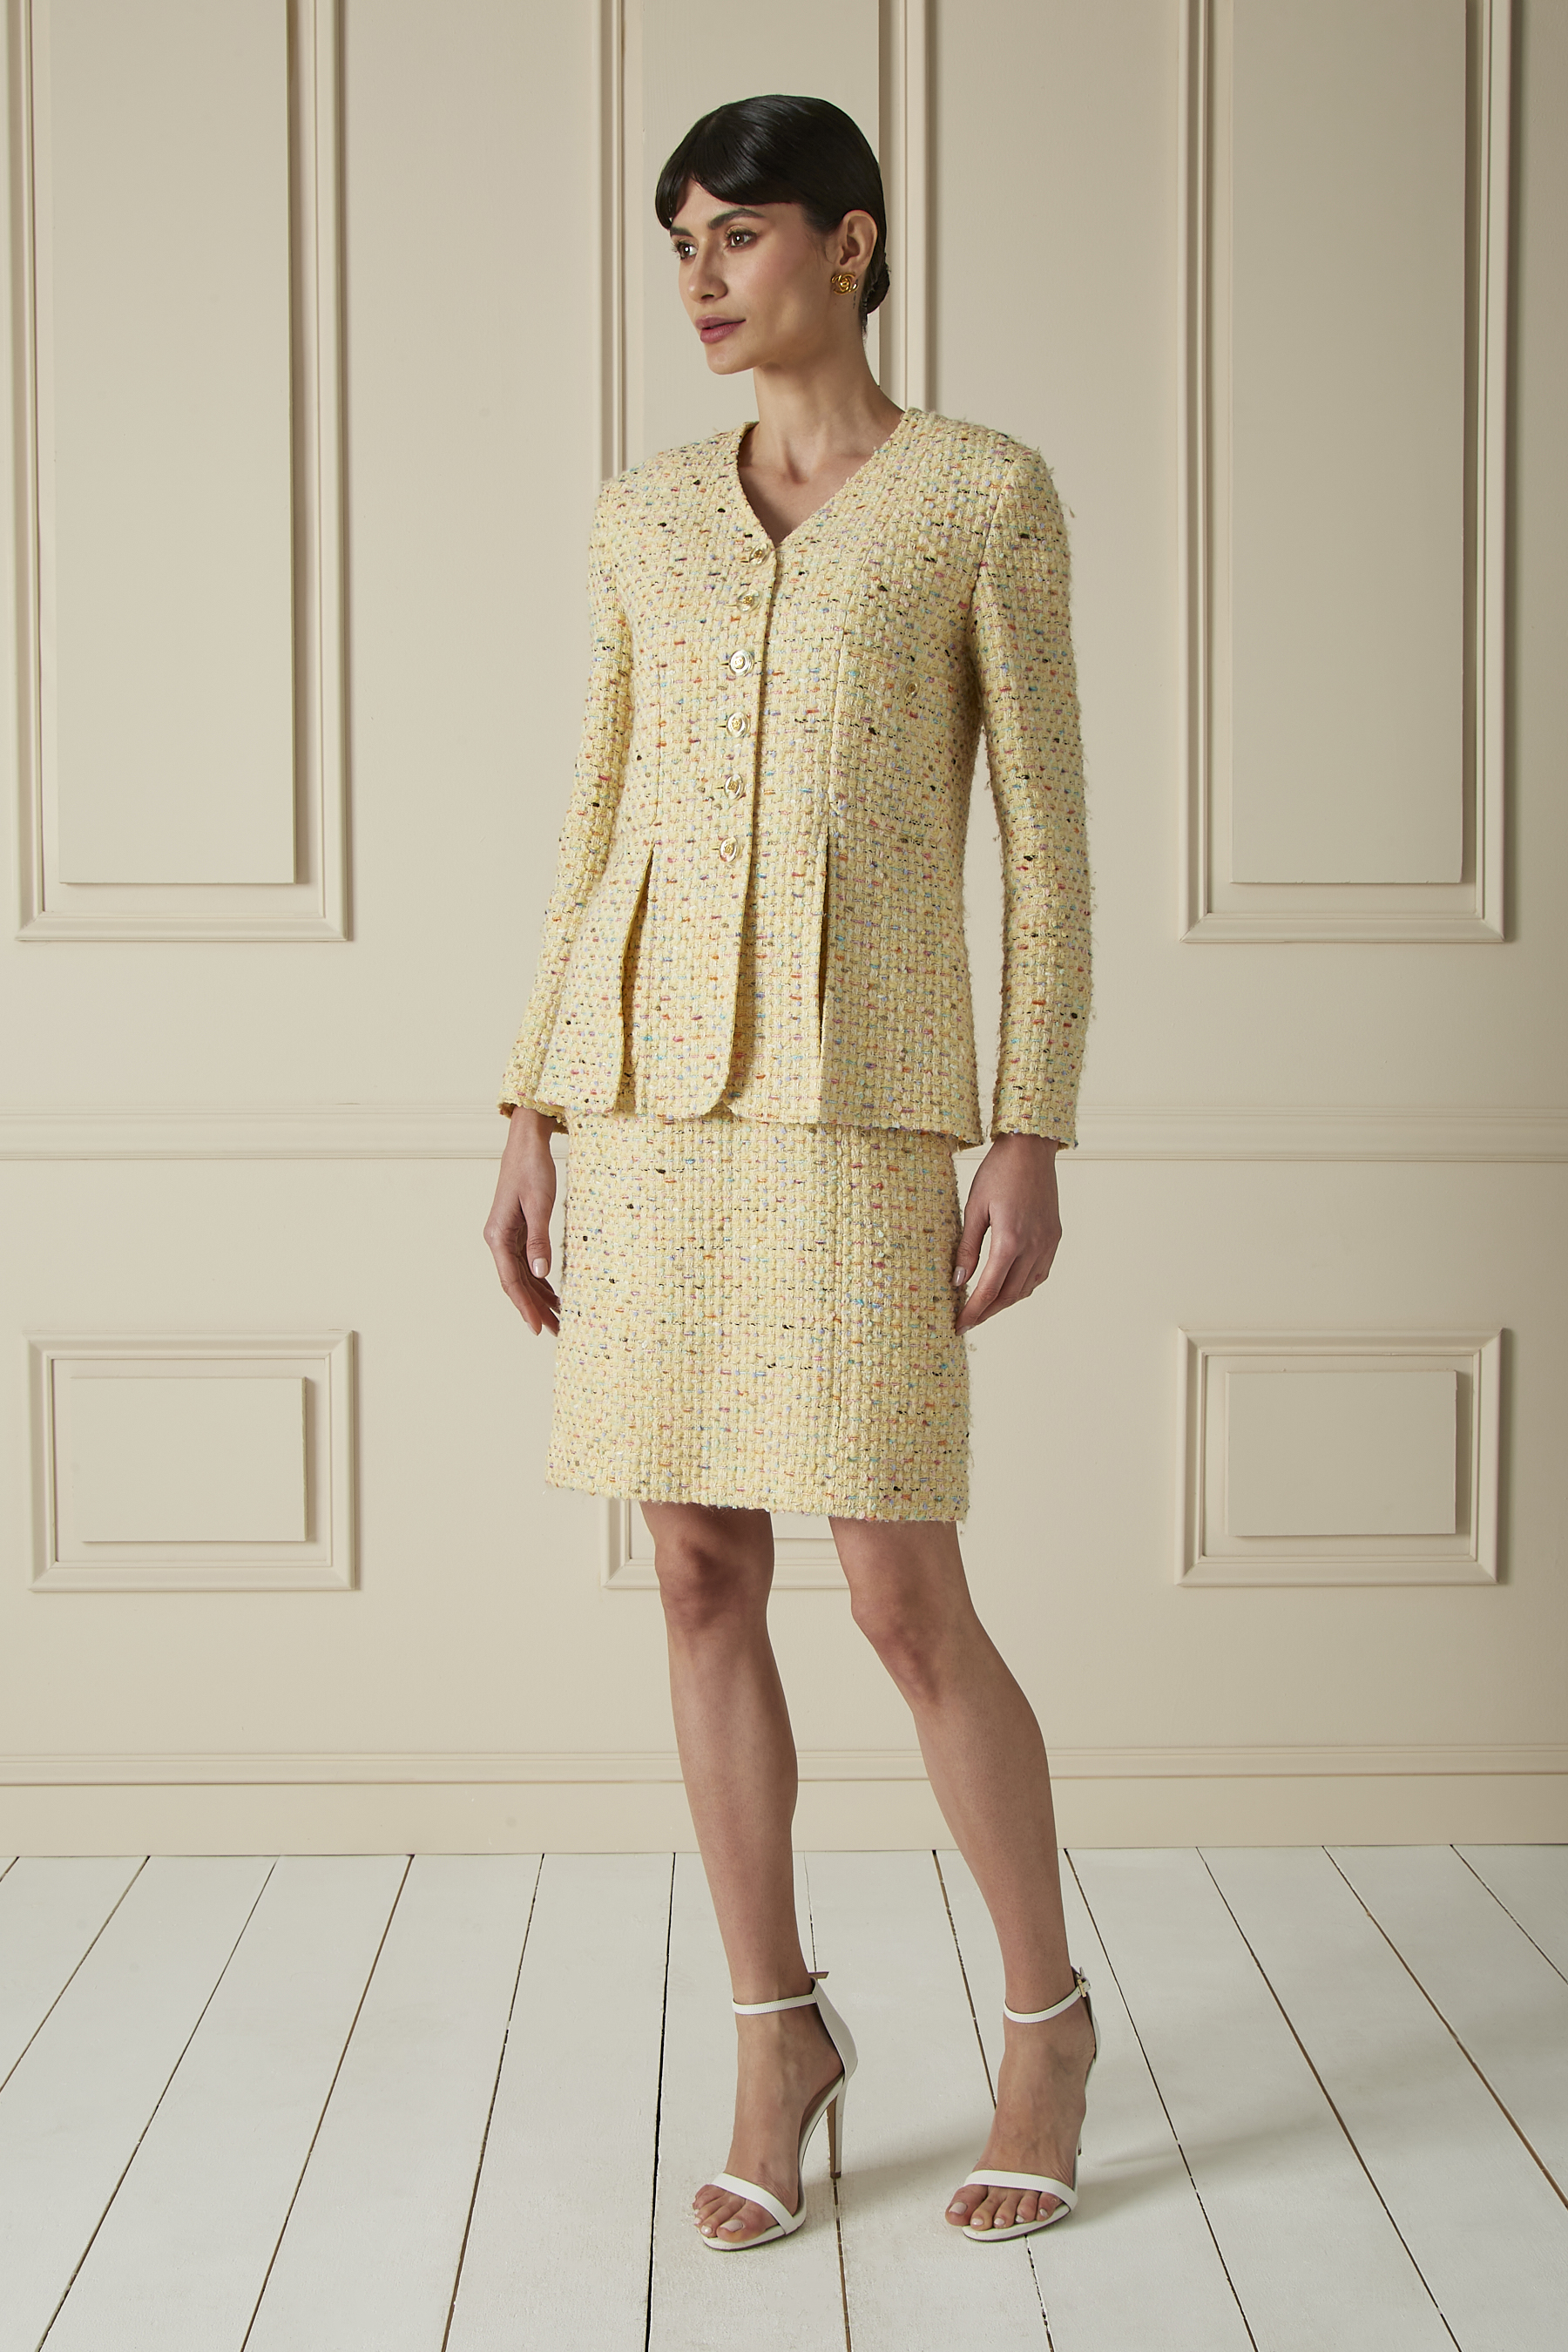 Chanel Yellow & Multicolor Wool Blend Tweed Jacket and Dress Set 60CHX-080